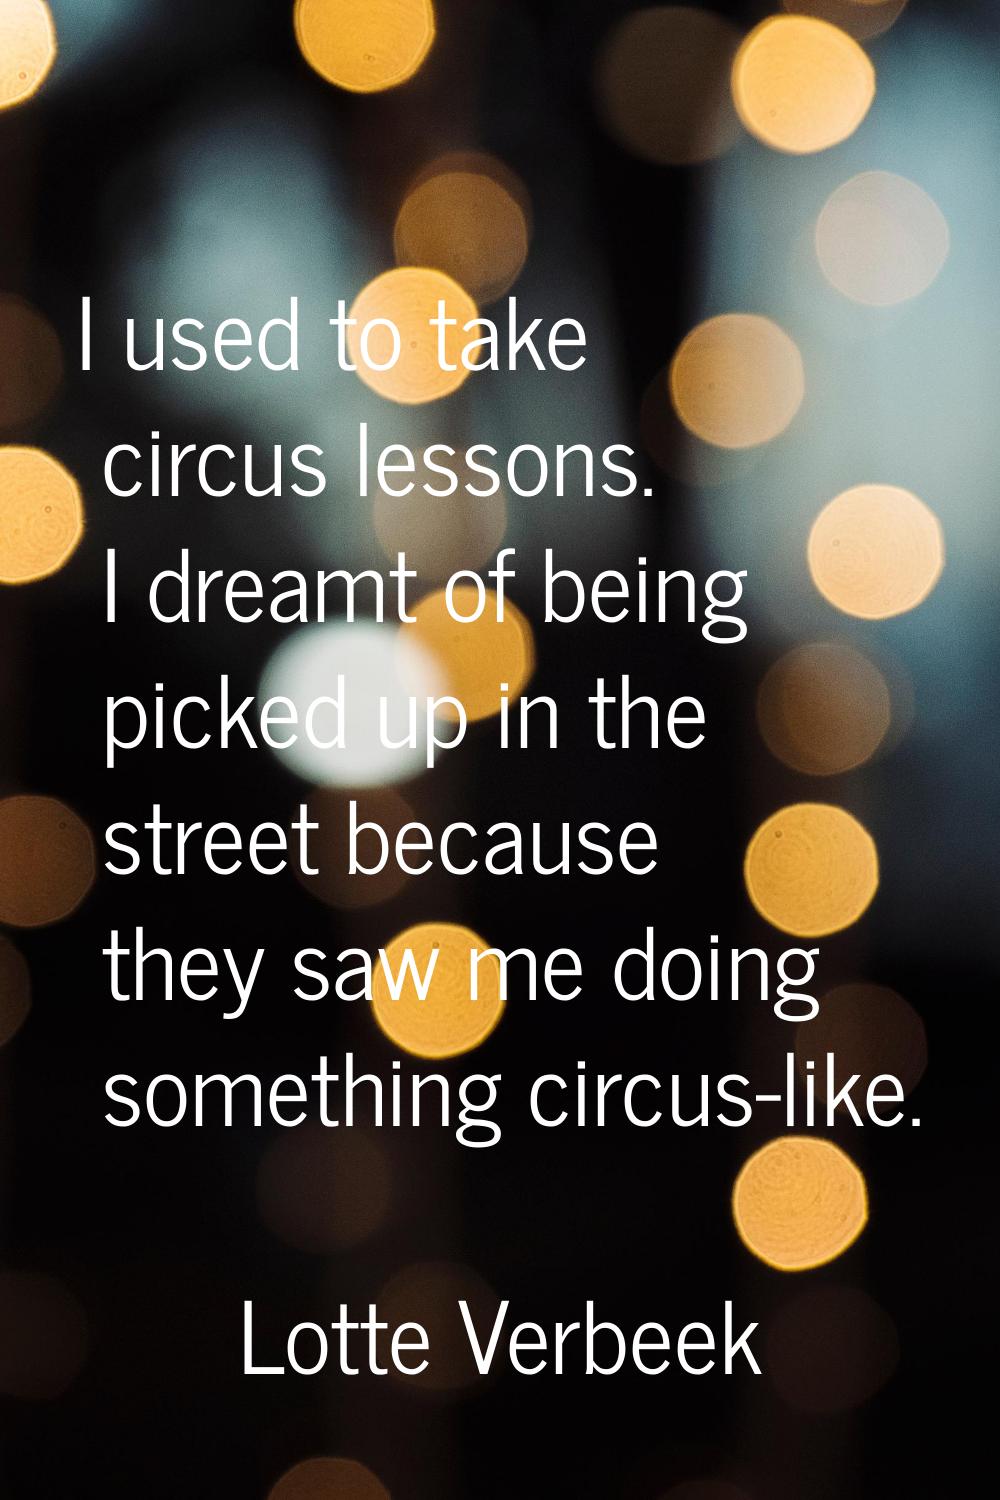 I used to take circus lessons. I dreamt of being picked up in the street because they saw me doing 